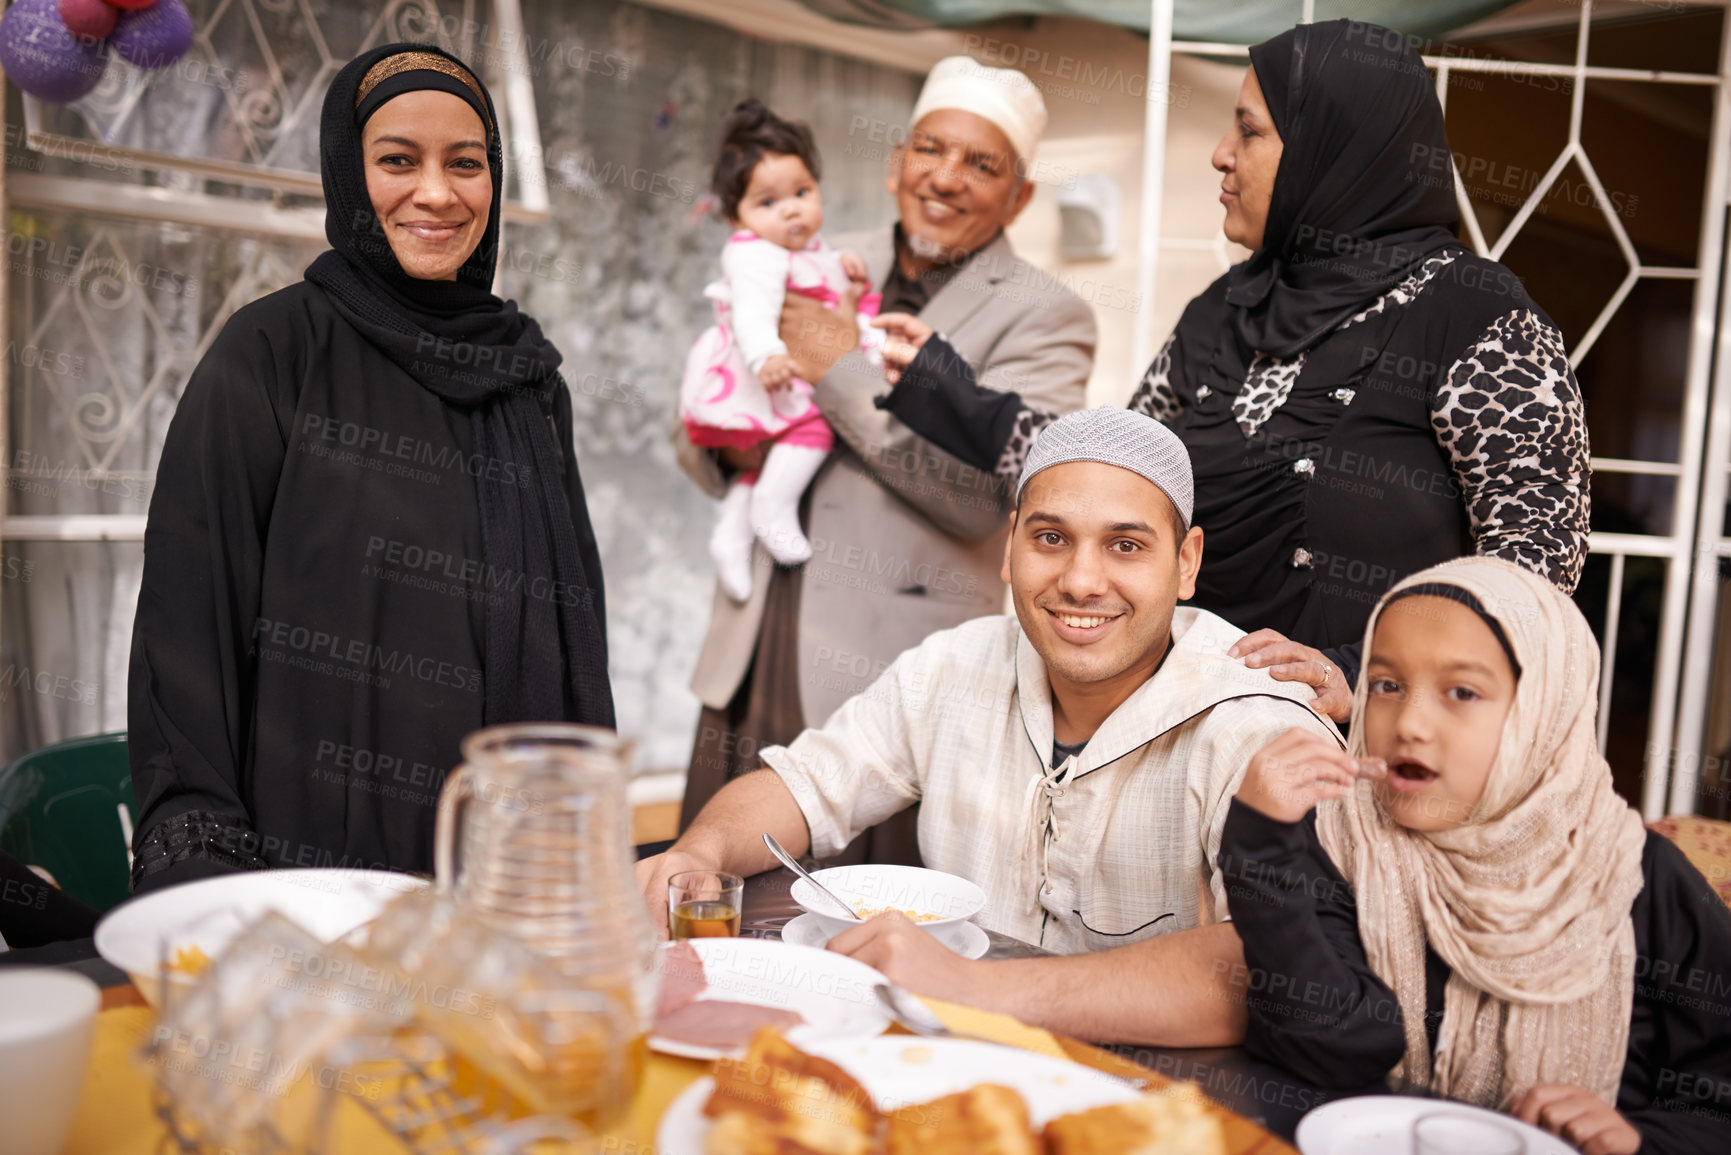 Buy stock photo Shot of a muslim family eating together